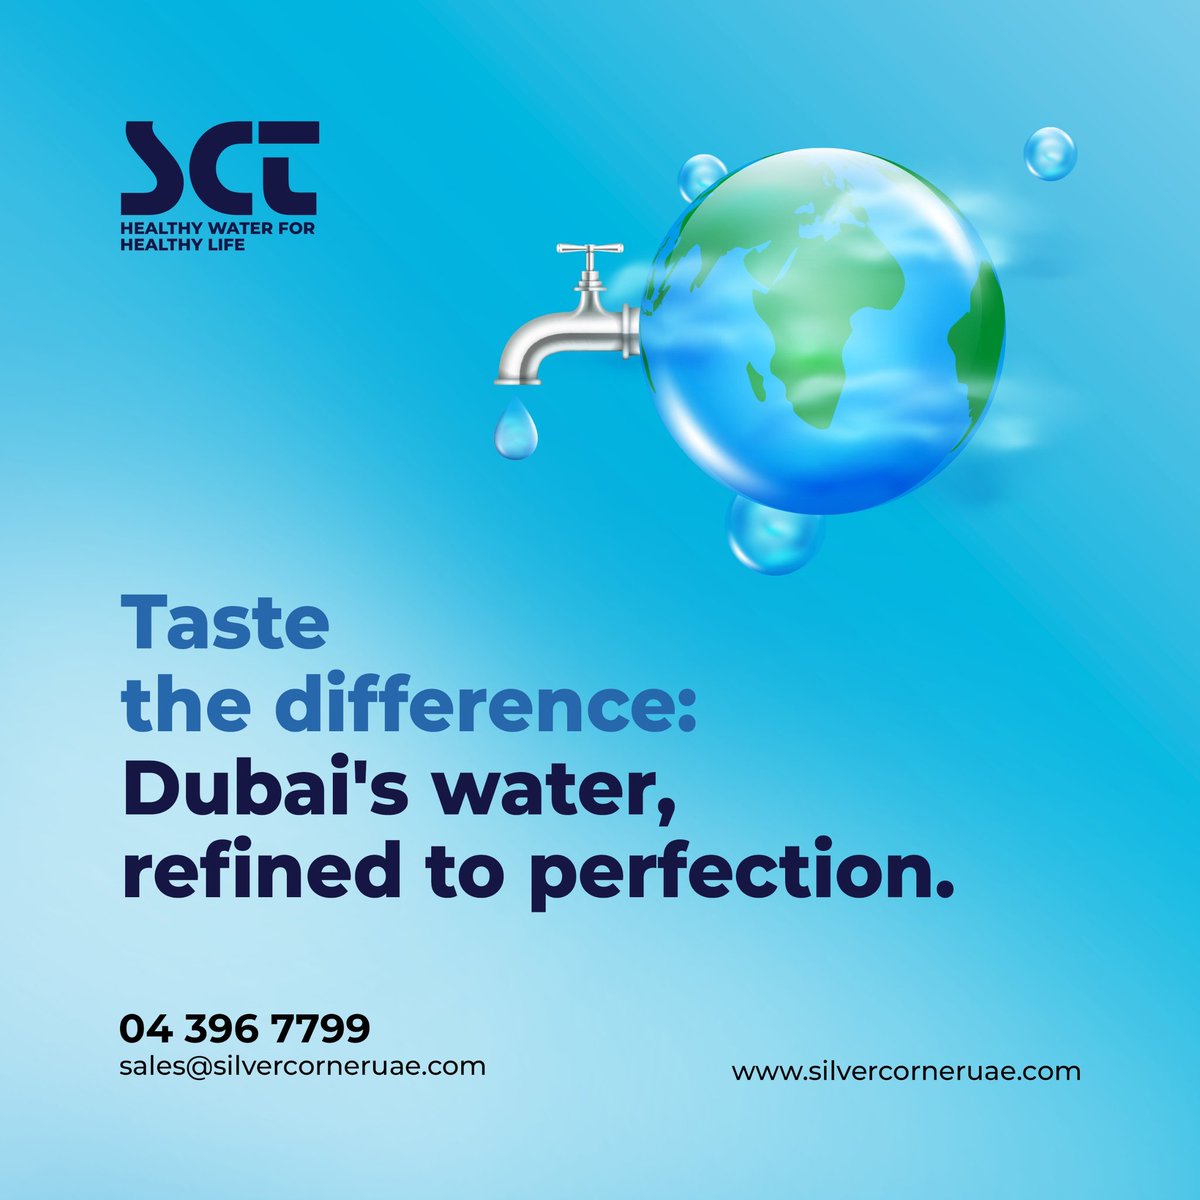 Quench your thirst with the pure taste of Dubai's finest water! 💧 Dive into refreshment like never before with SCT. 

#PureDubai #SCT #dubaiwater #dubaifilter #watertreatment #waterfilter #rain #rainstorm #rainwater #watertreatment